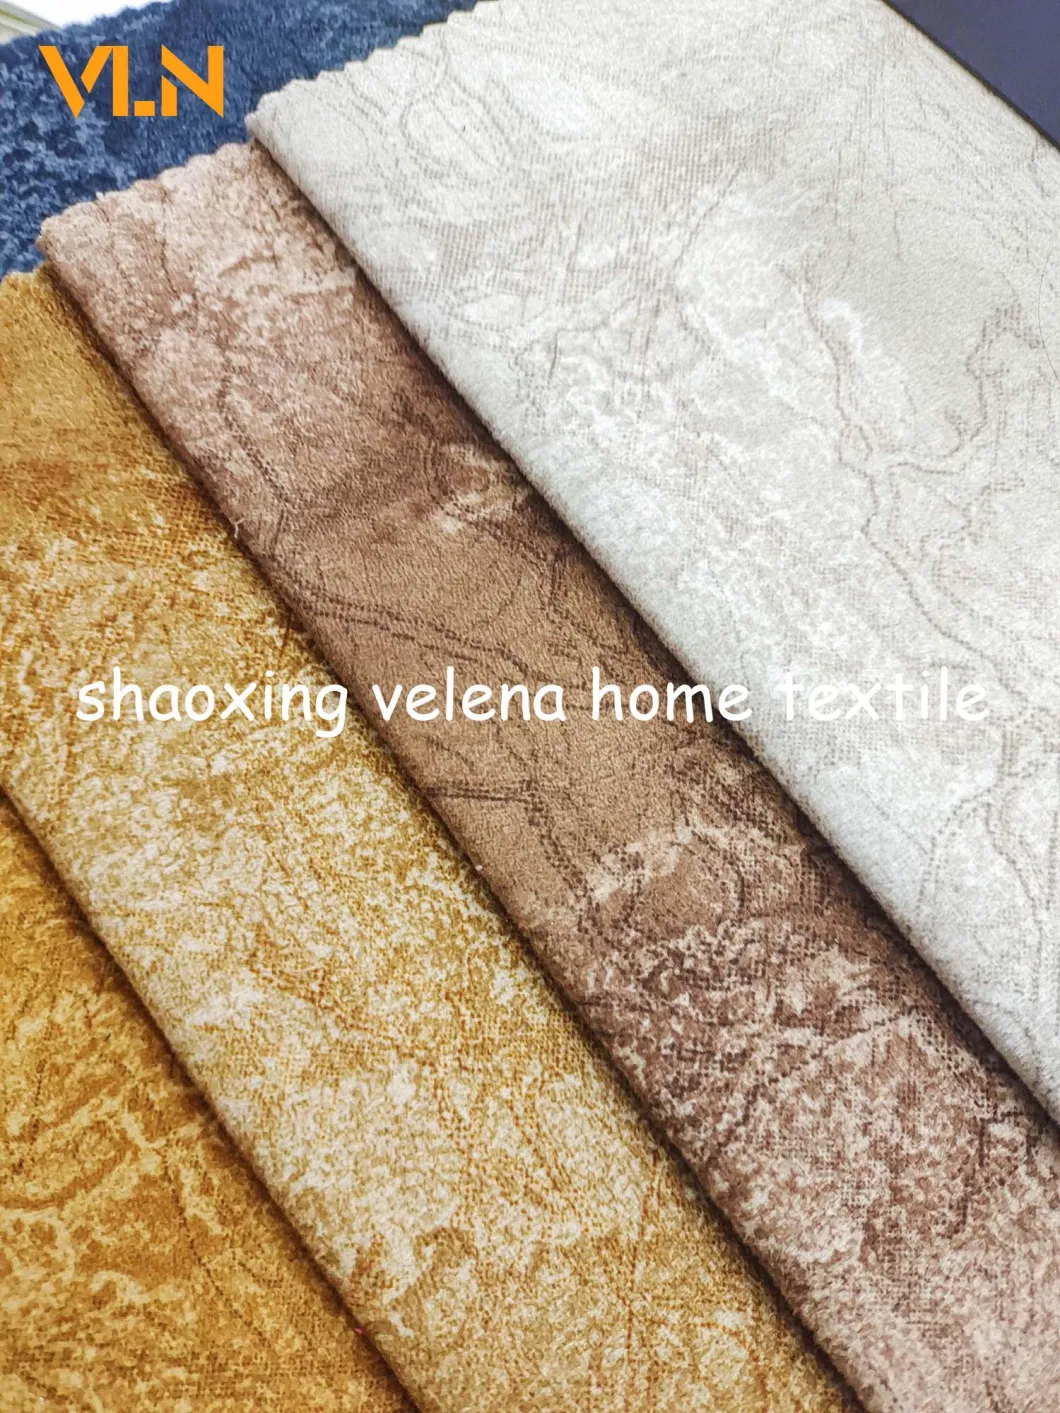 Home Textiles 100% Polyester Holland Velevt Matt Finished Dyeing with Printing and Foil Terciopelo Upholstery Furniture Fabric 0216-1